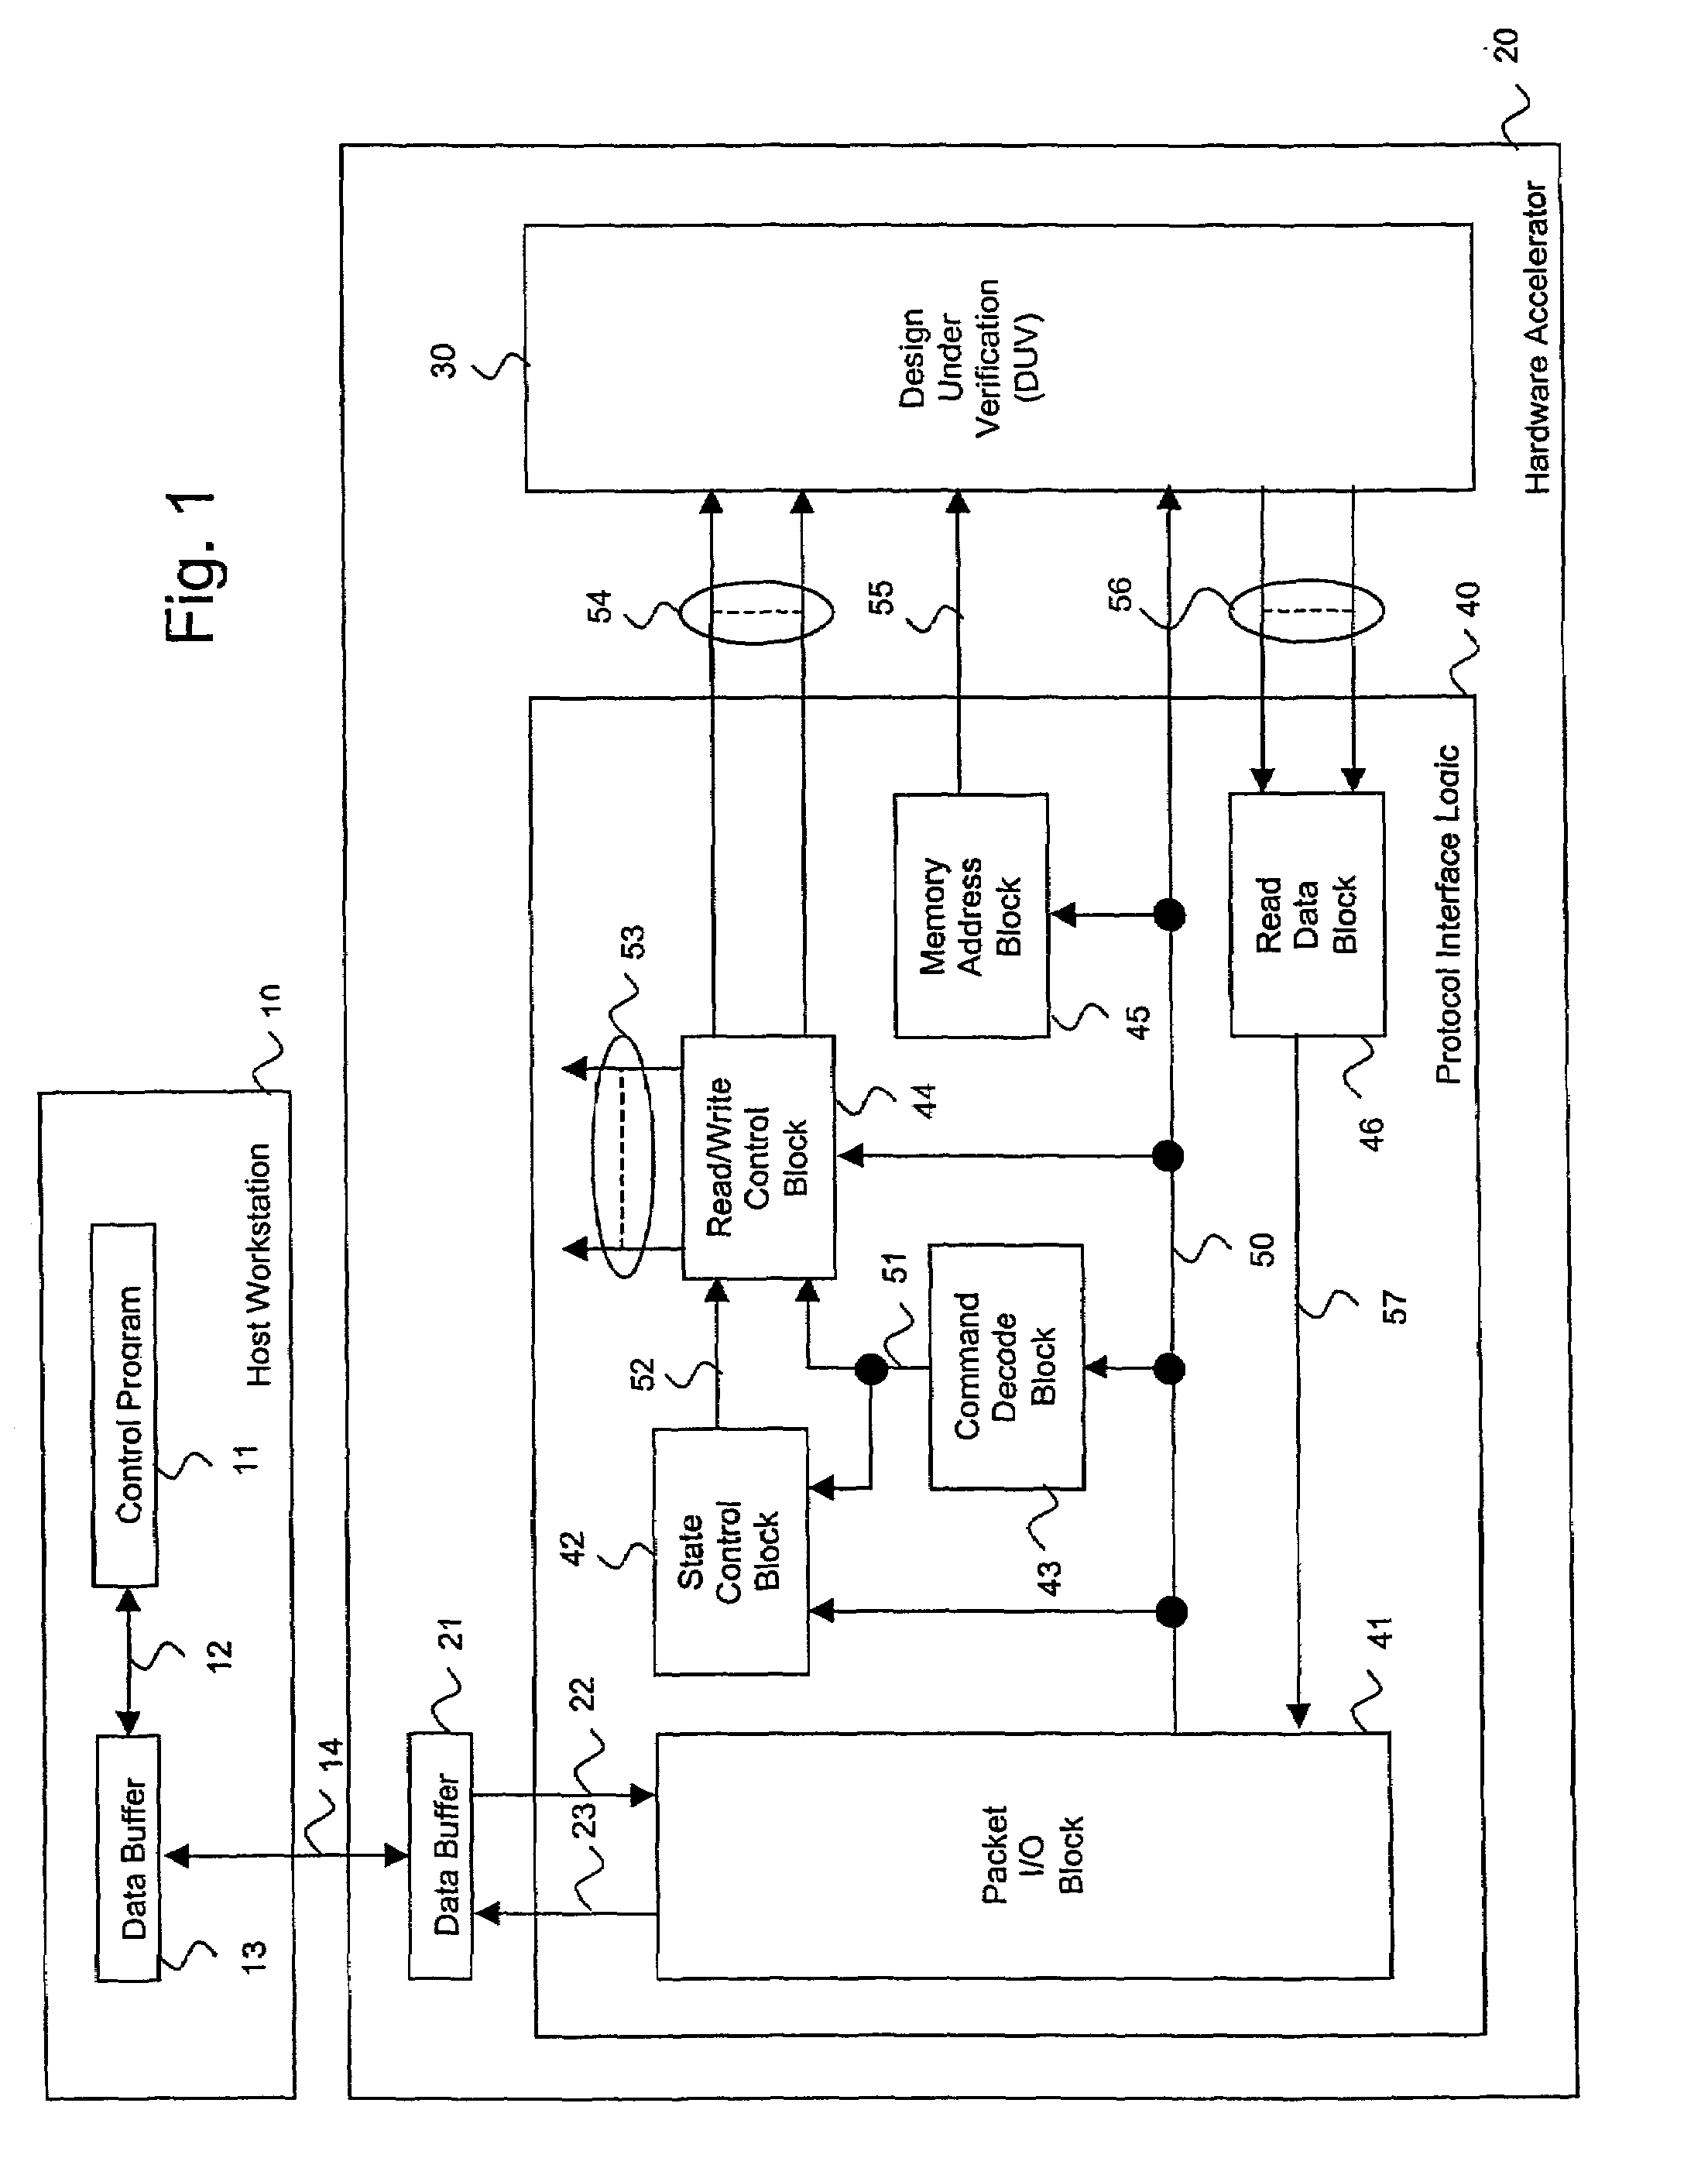 Hardware-assisted design verification system using a packet-based protocol logic synthesized for efficient data loading and unloading